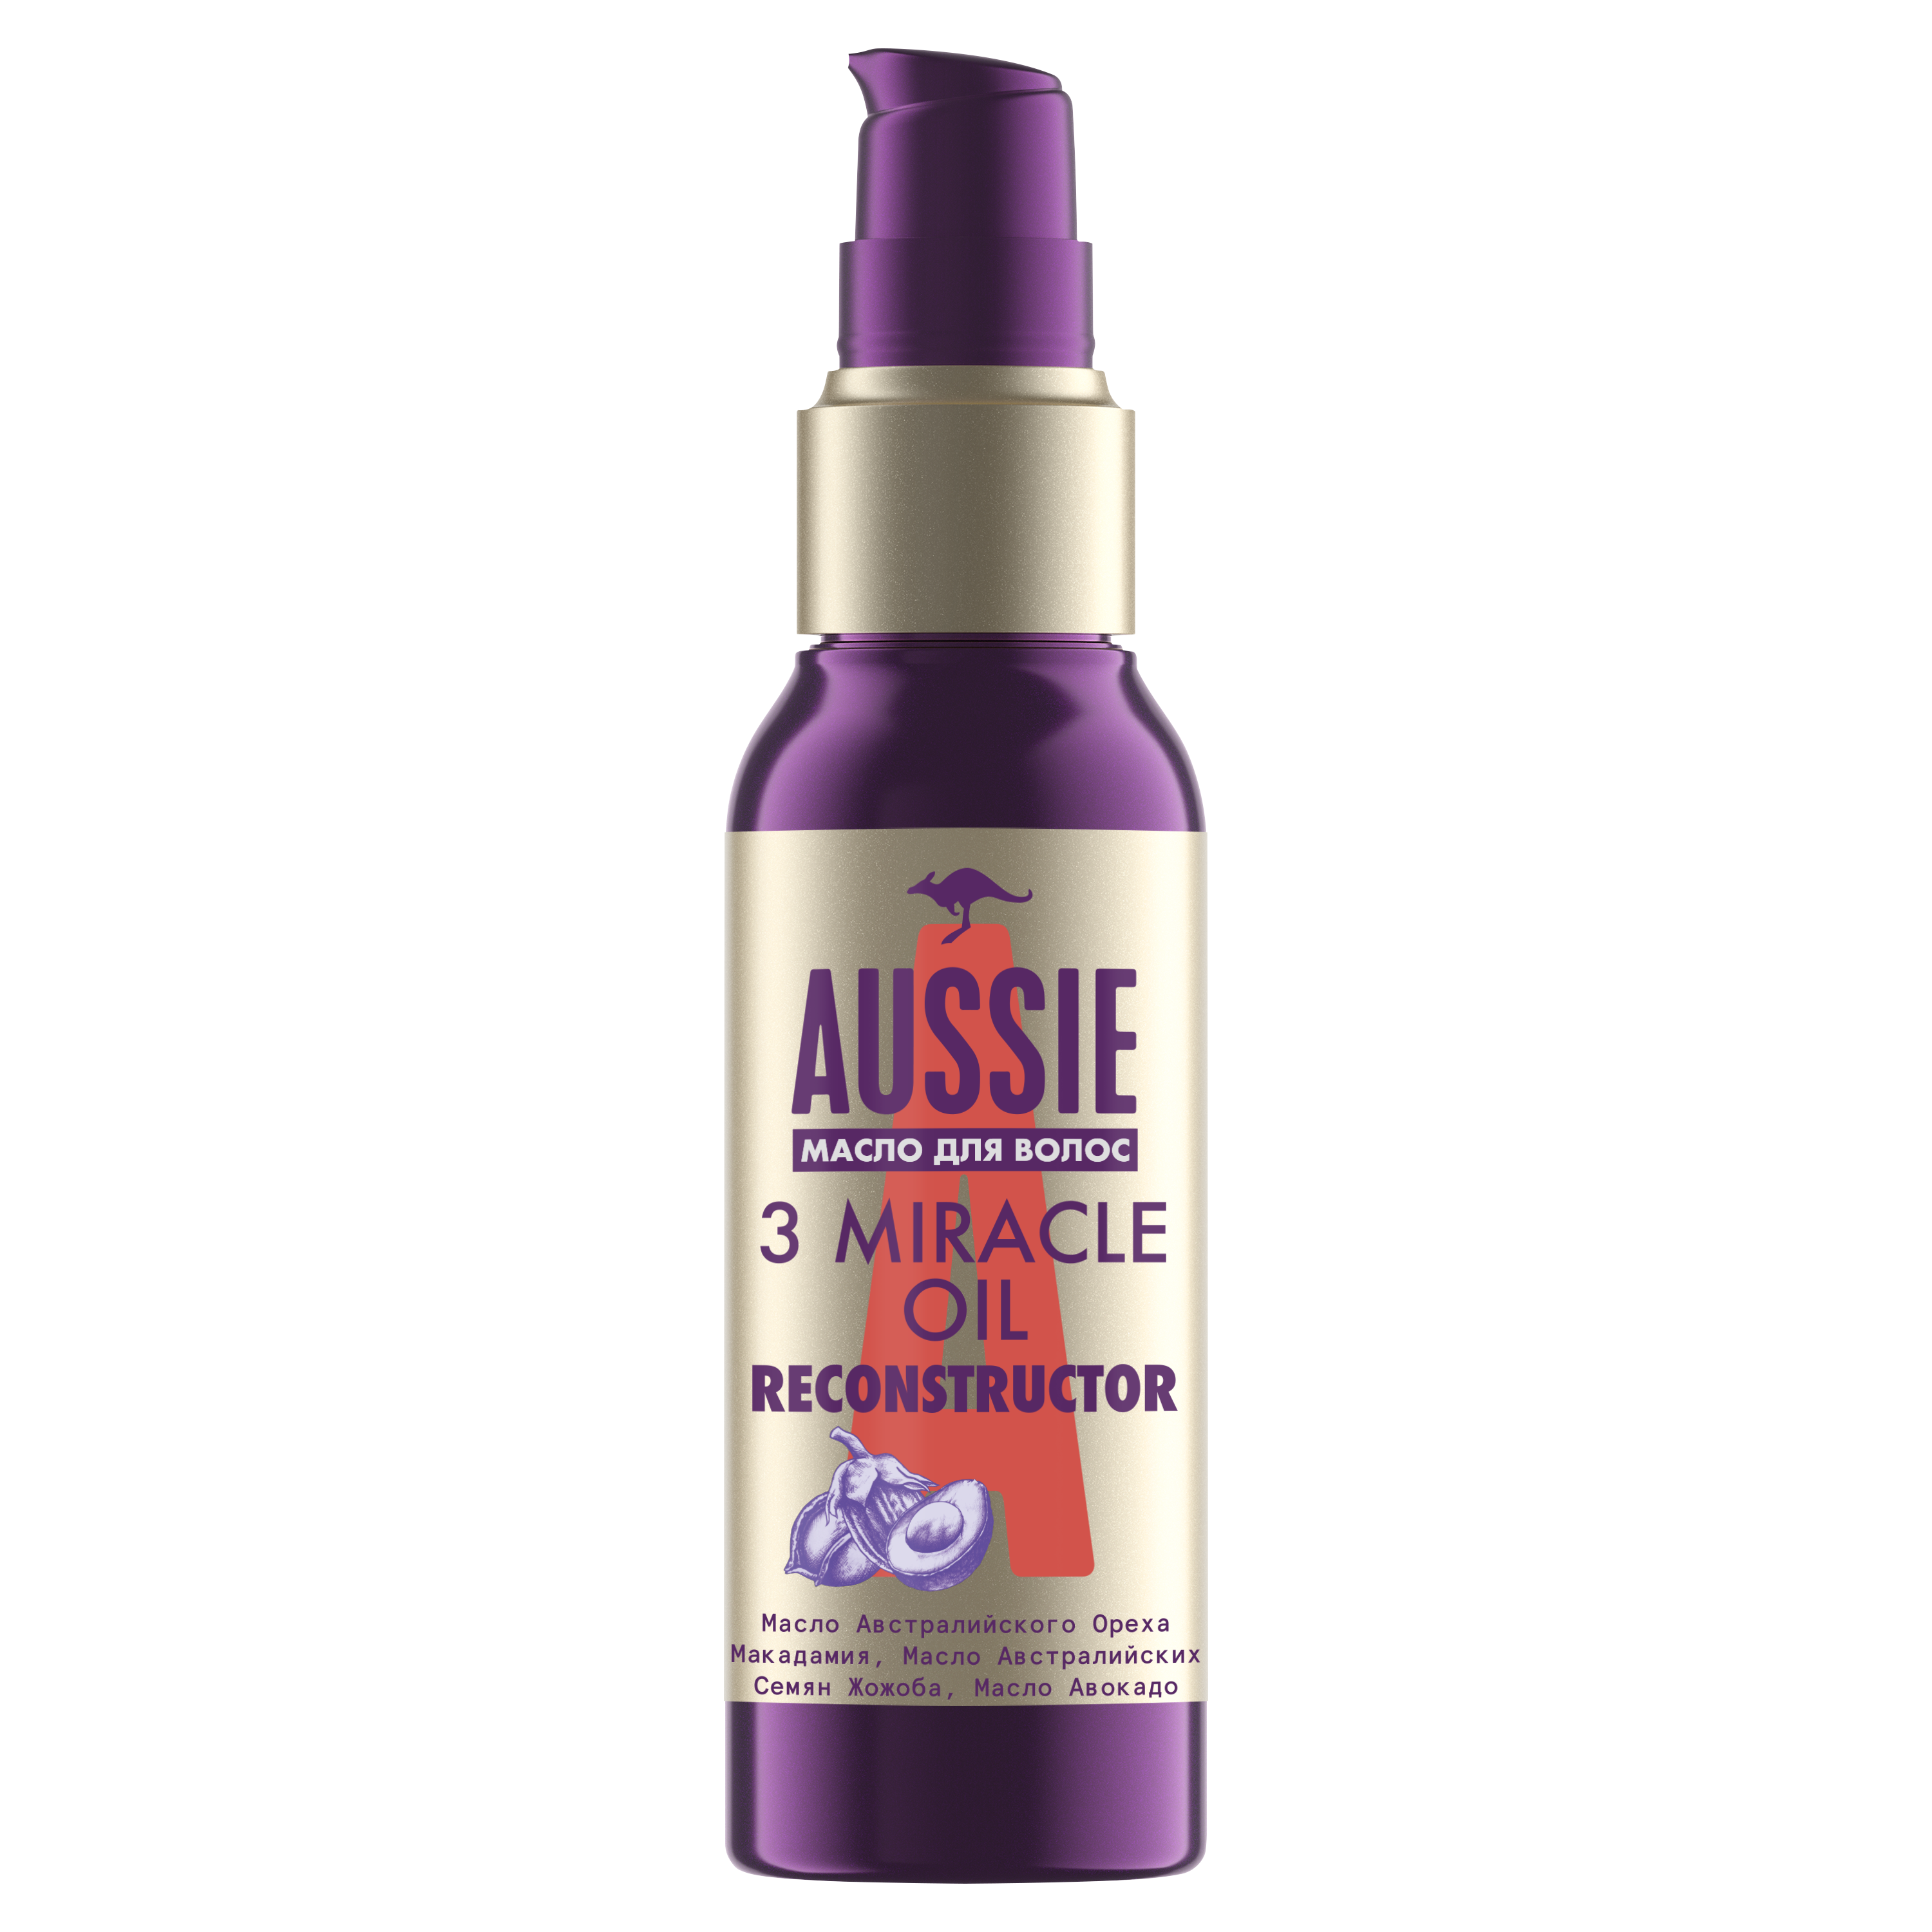 Масло для волос Aussie 3 Miracle Oil Reconstructor, 100 мл - фото 2